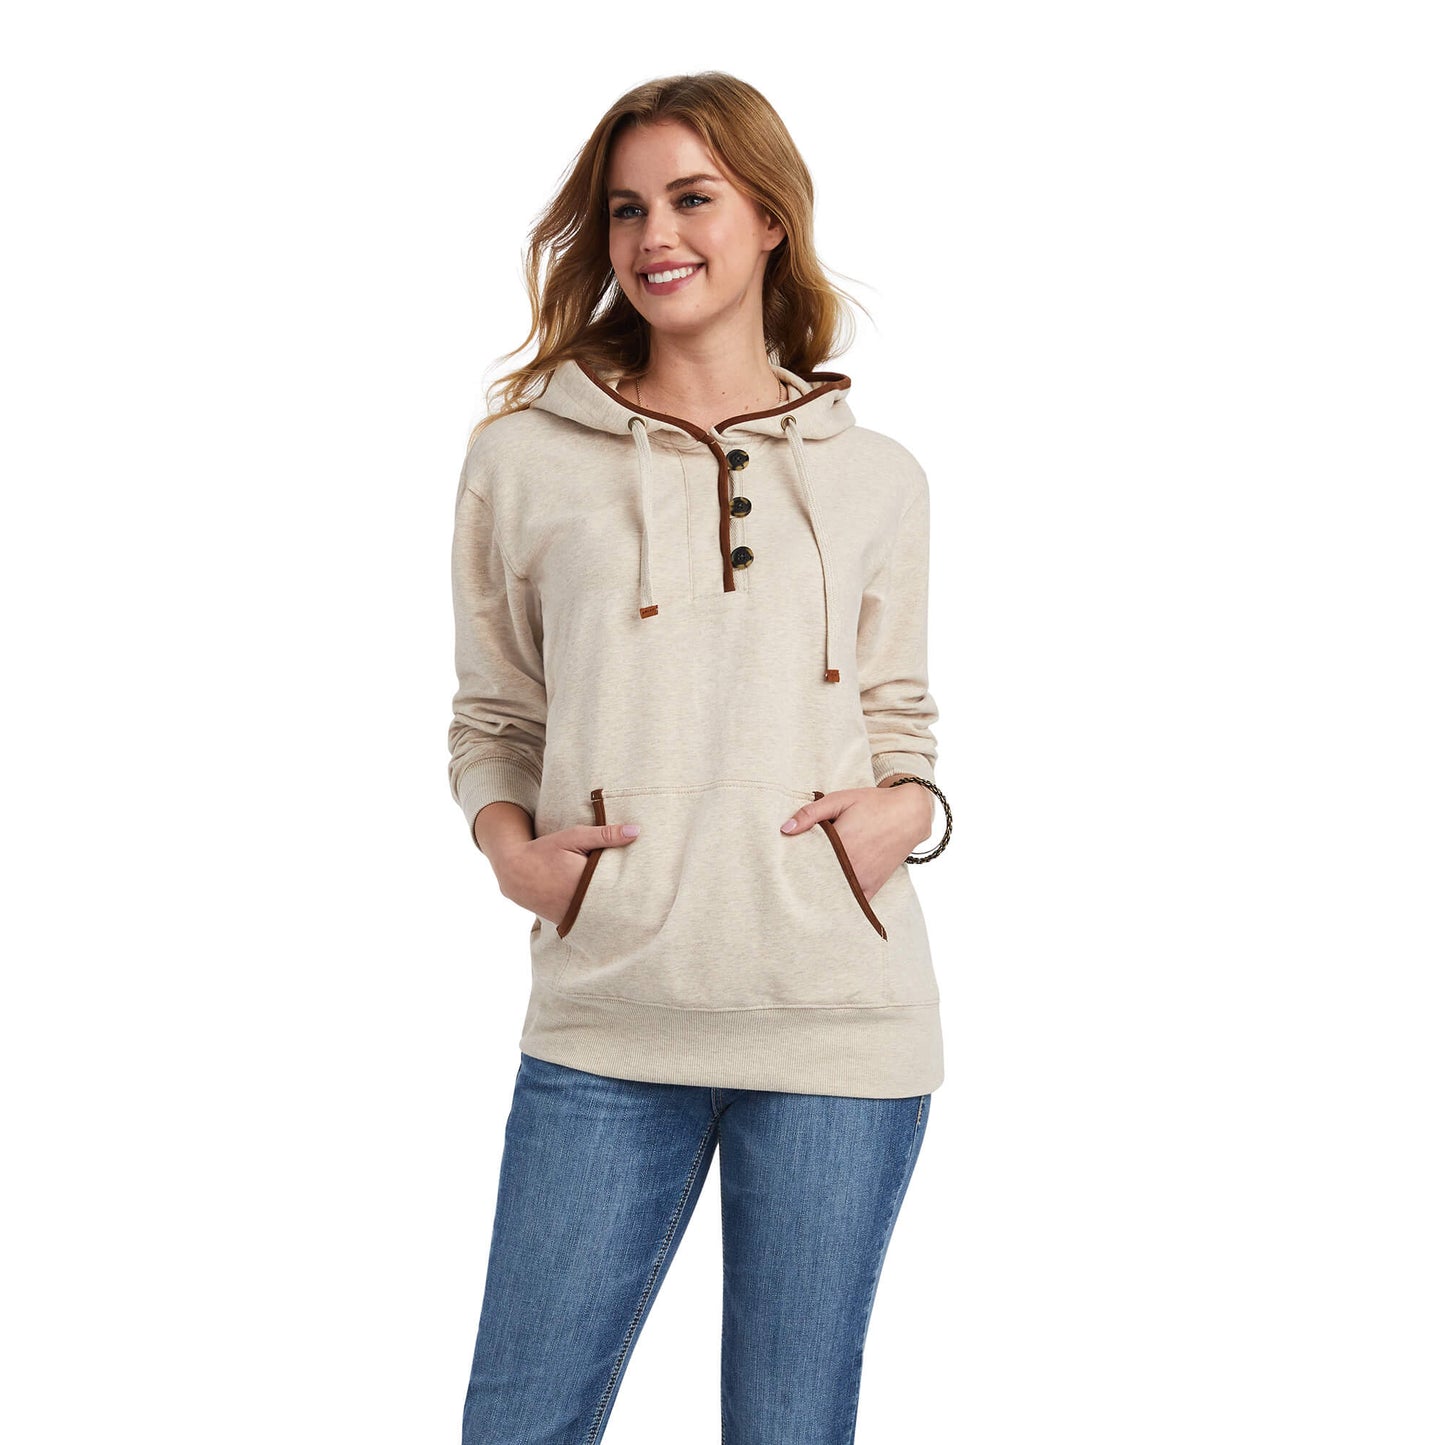 Ariat WOMEN'S Style No. 10042239 REAL Elevated Hoodie